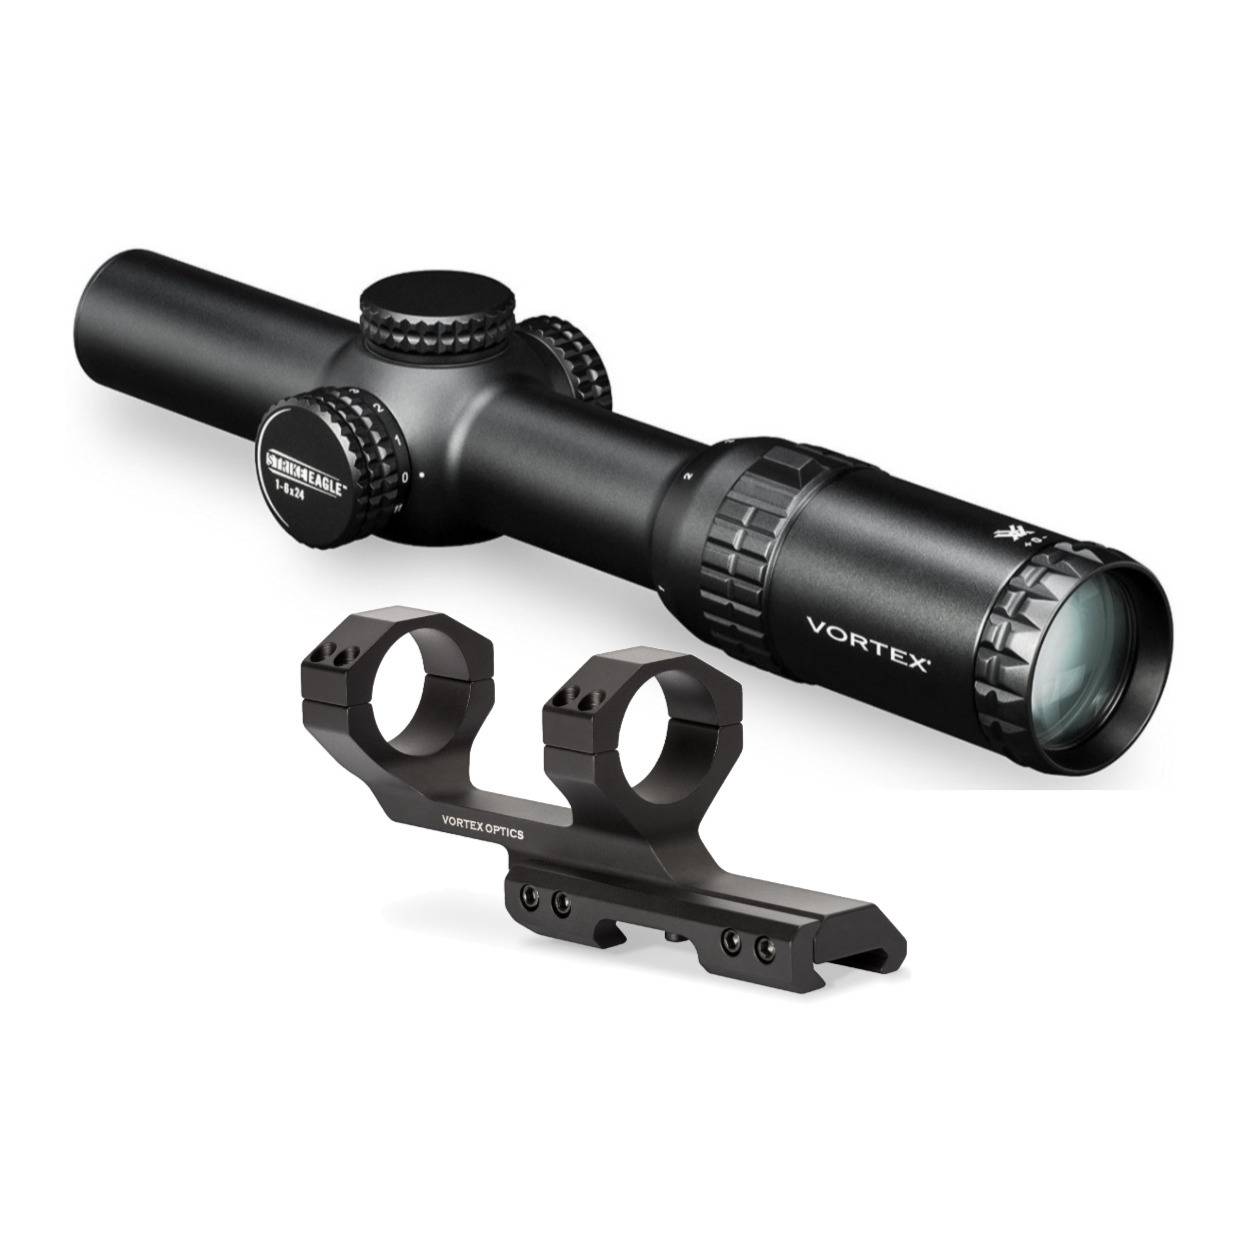 Vortex Strike Eagle 1-6x24 BDC Reticle Riflescope with 30mm Cantilever Mount